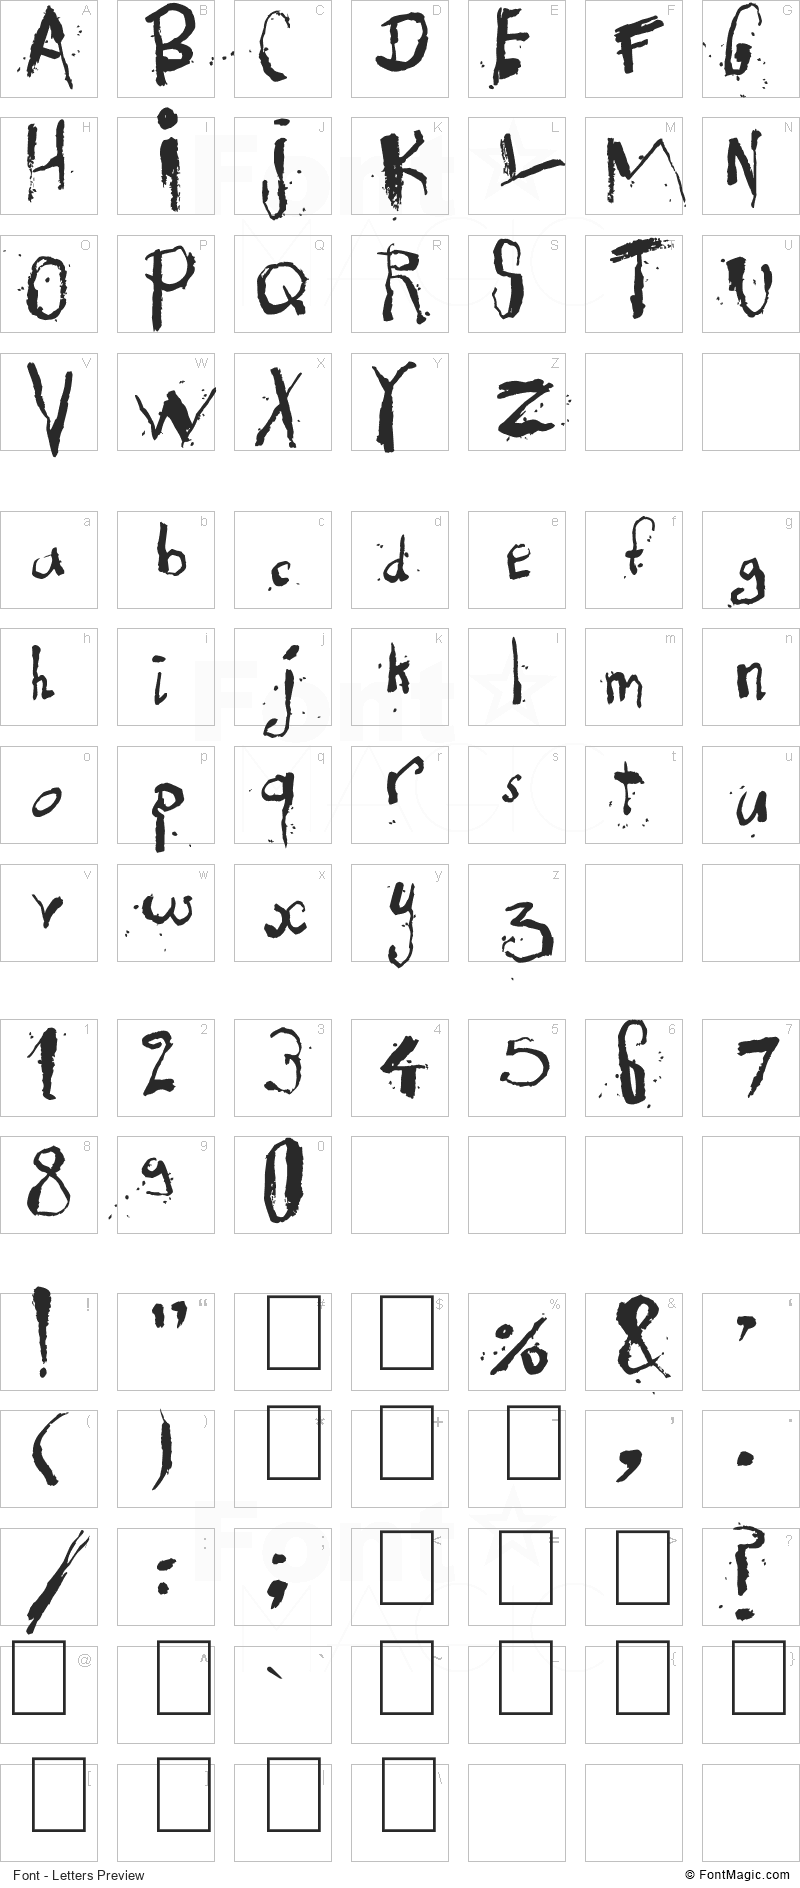 Exhausted Font - All Latters Preview Chart